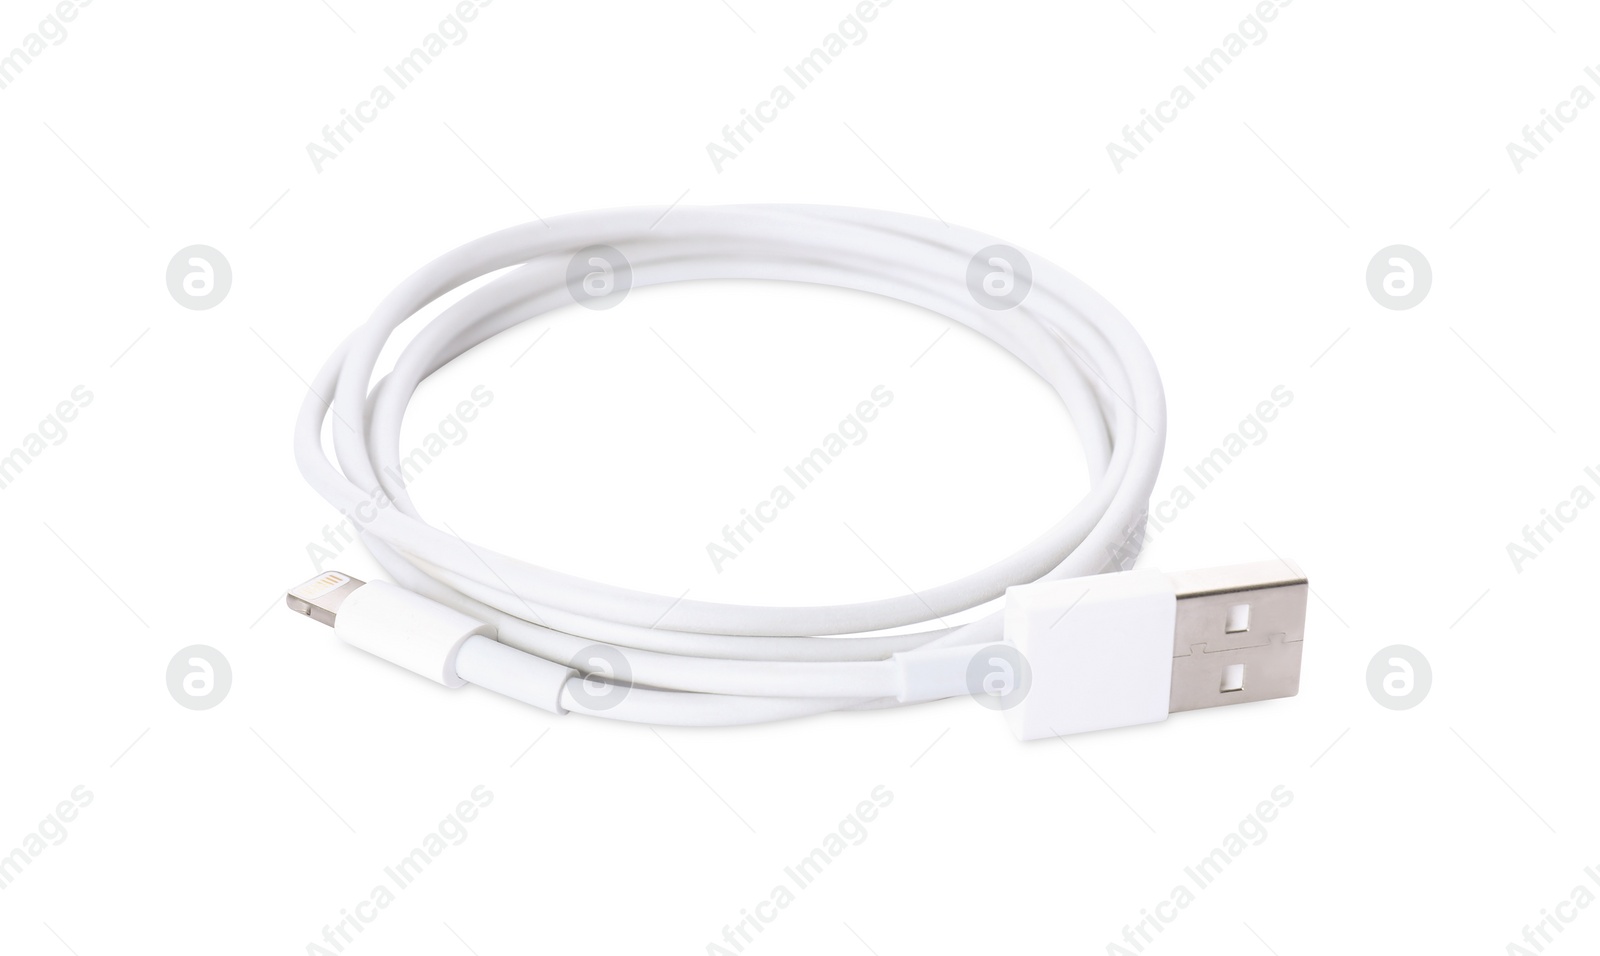 Photo of USB cable with lightning connector isolated on white